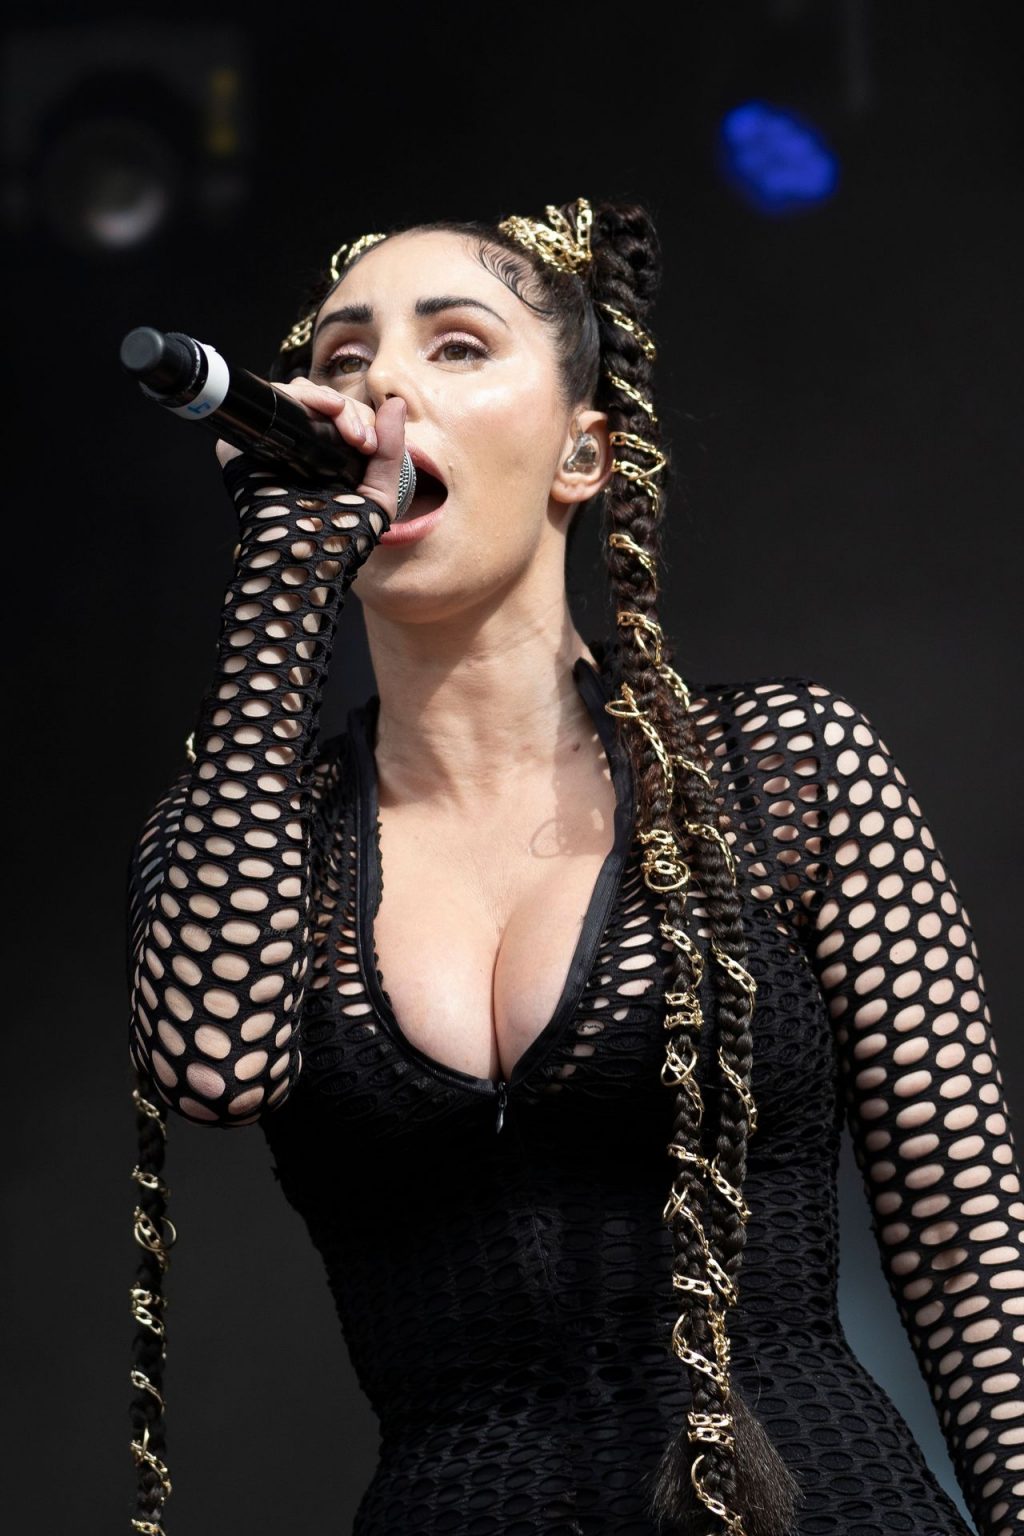 Mala Rodriguez Performs on Stage in Madrid (13 Photos + Video)